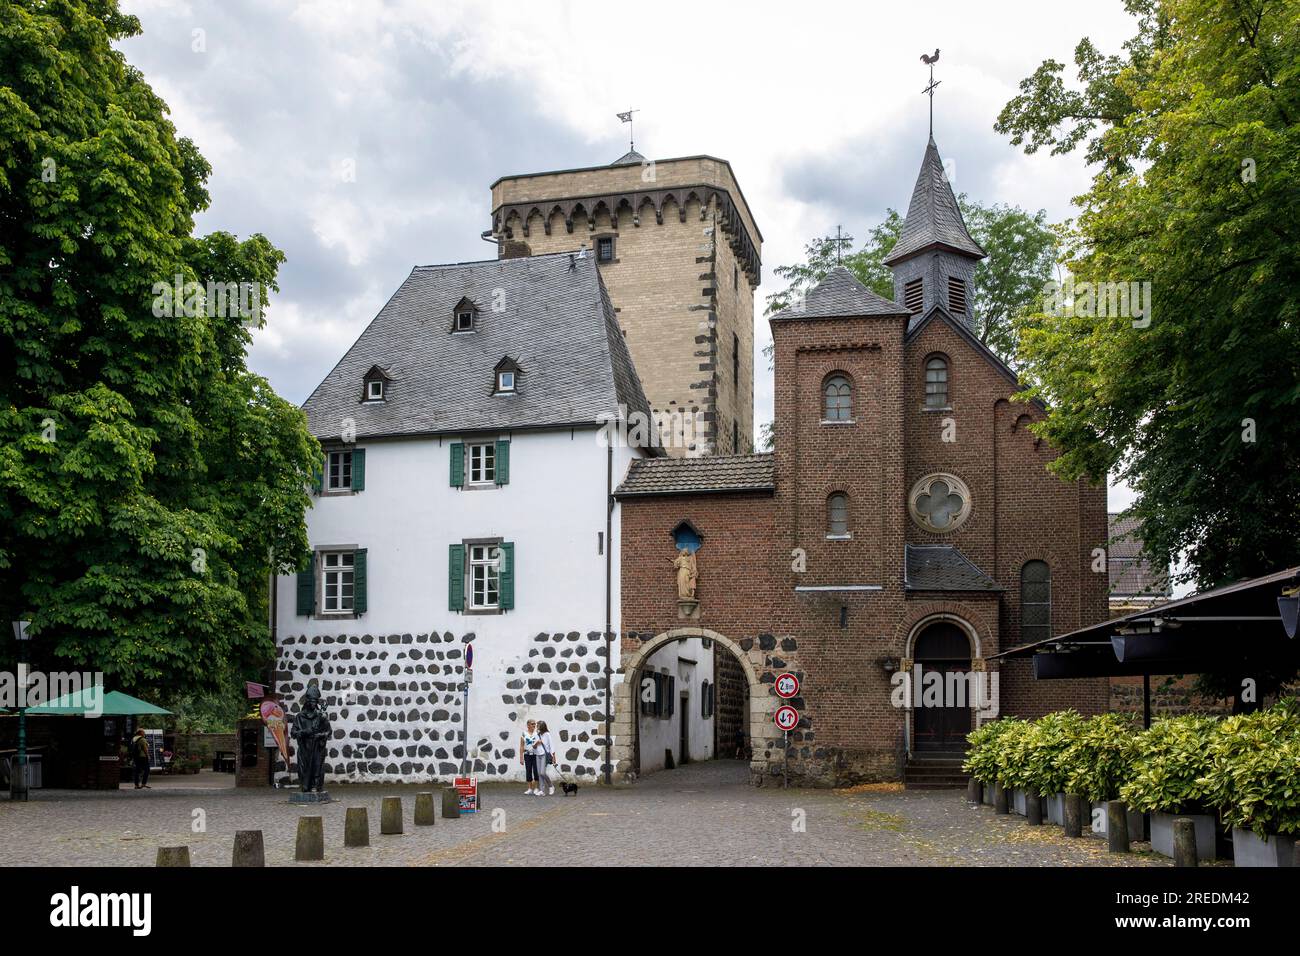 Rhine Gate with Toll Tower and Holy Trinity Chapel in Zons on the river Rhine, North Rhine-Westphalia, Germany Rheintor mit Zollturm und Kapelle zur h Stock Photo